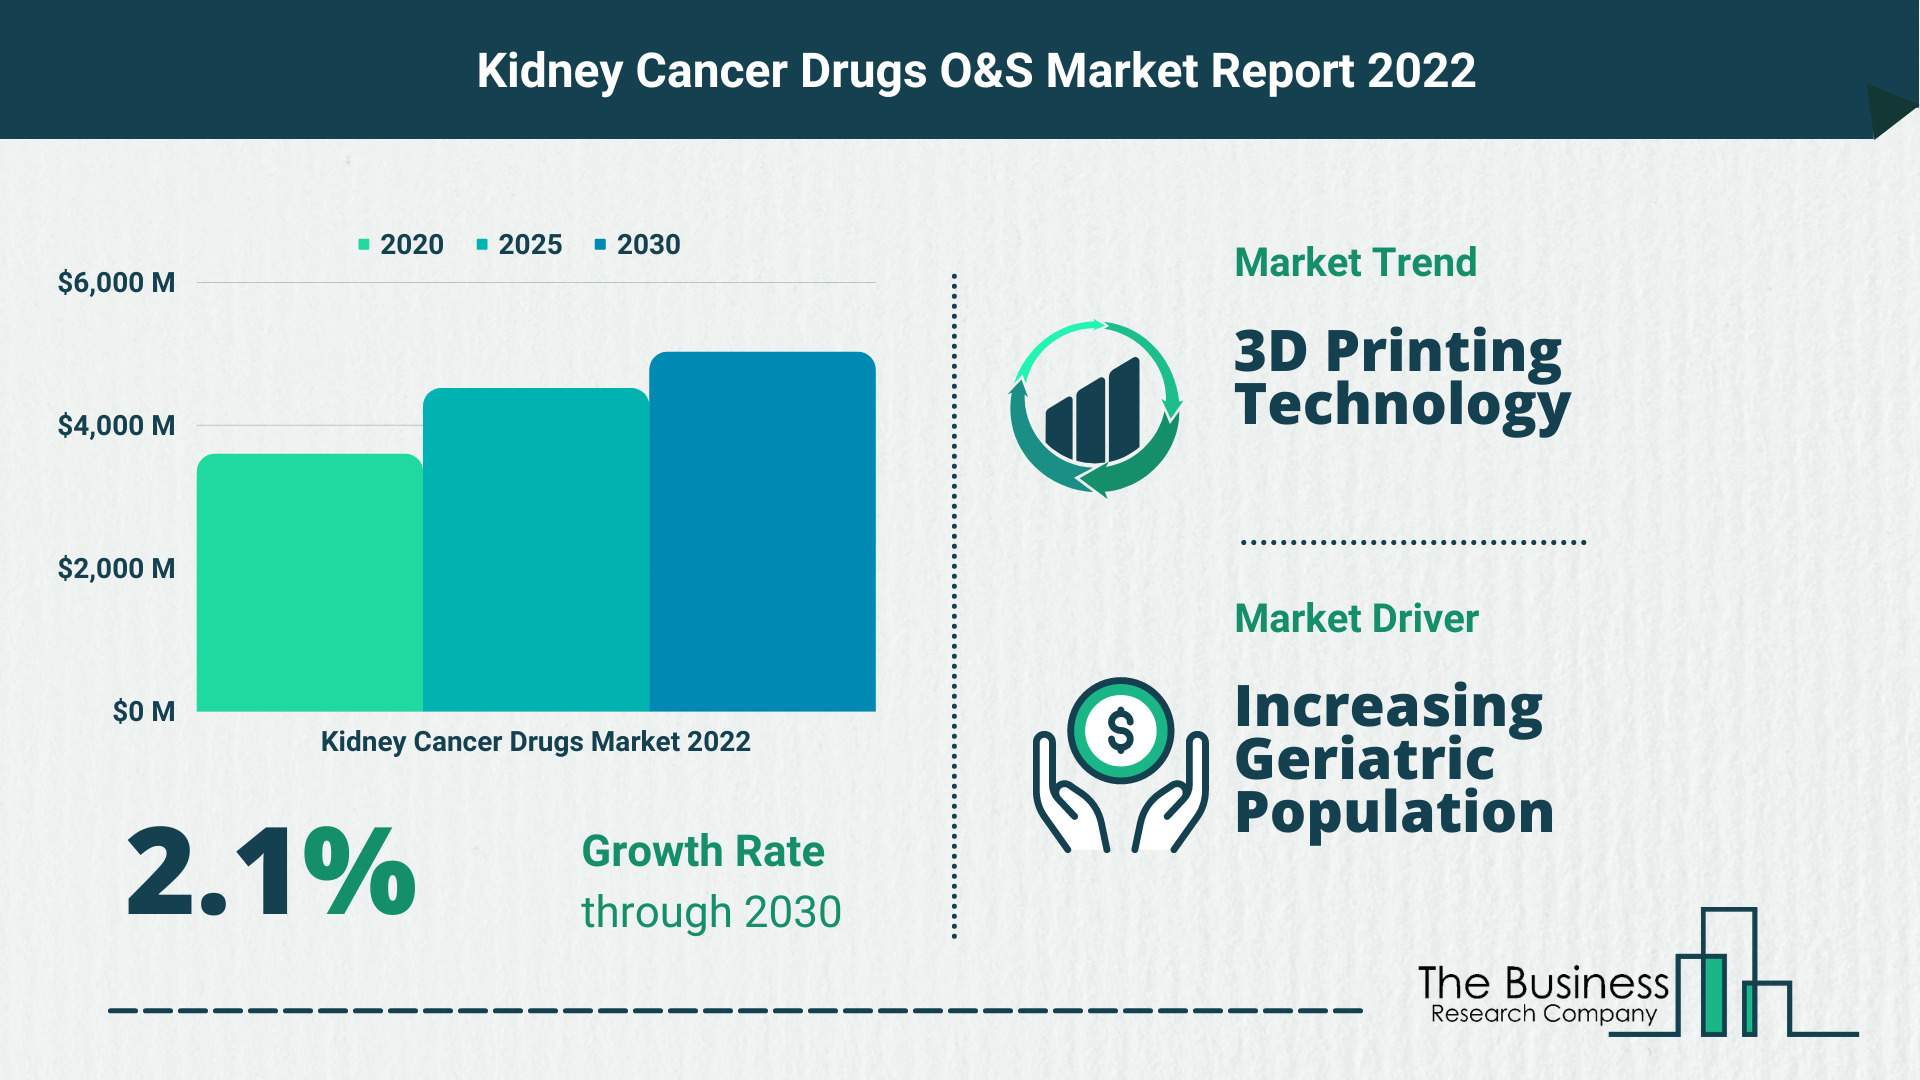 Global Kidney Cancer Drugs Market 2022 – Market Opportunities And Strategies